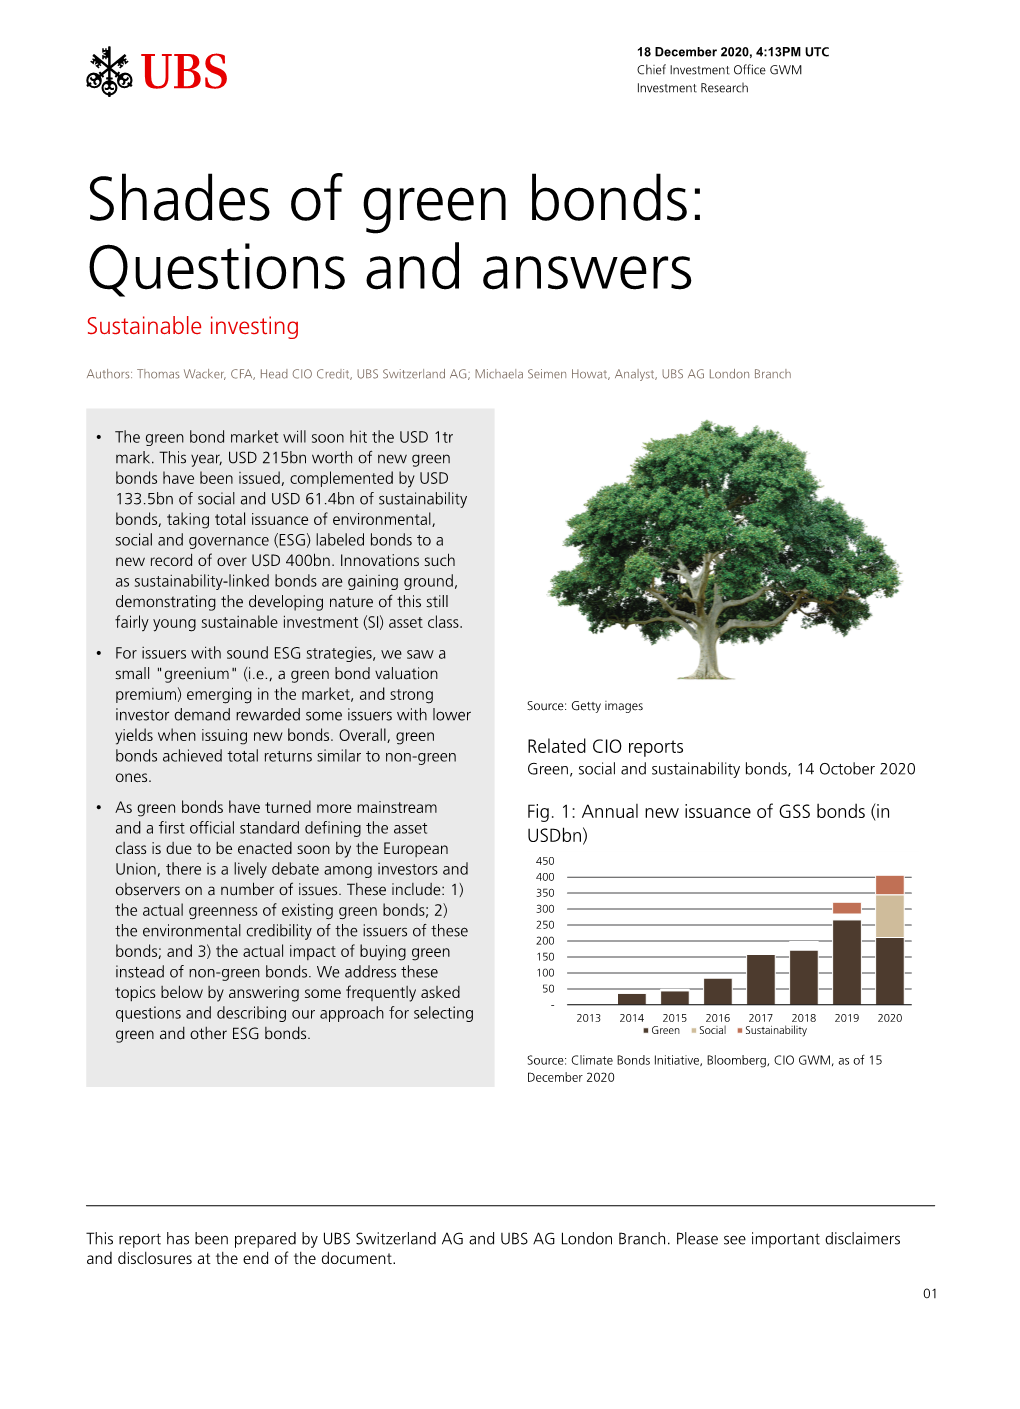 Shades of Green Bonds: Questions and Answers Sustainable Investing